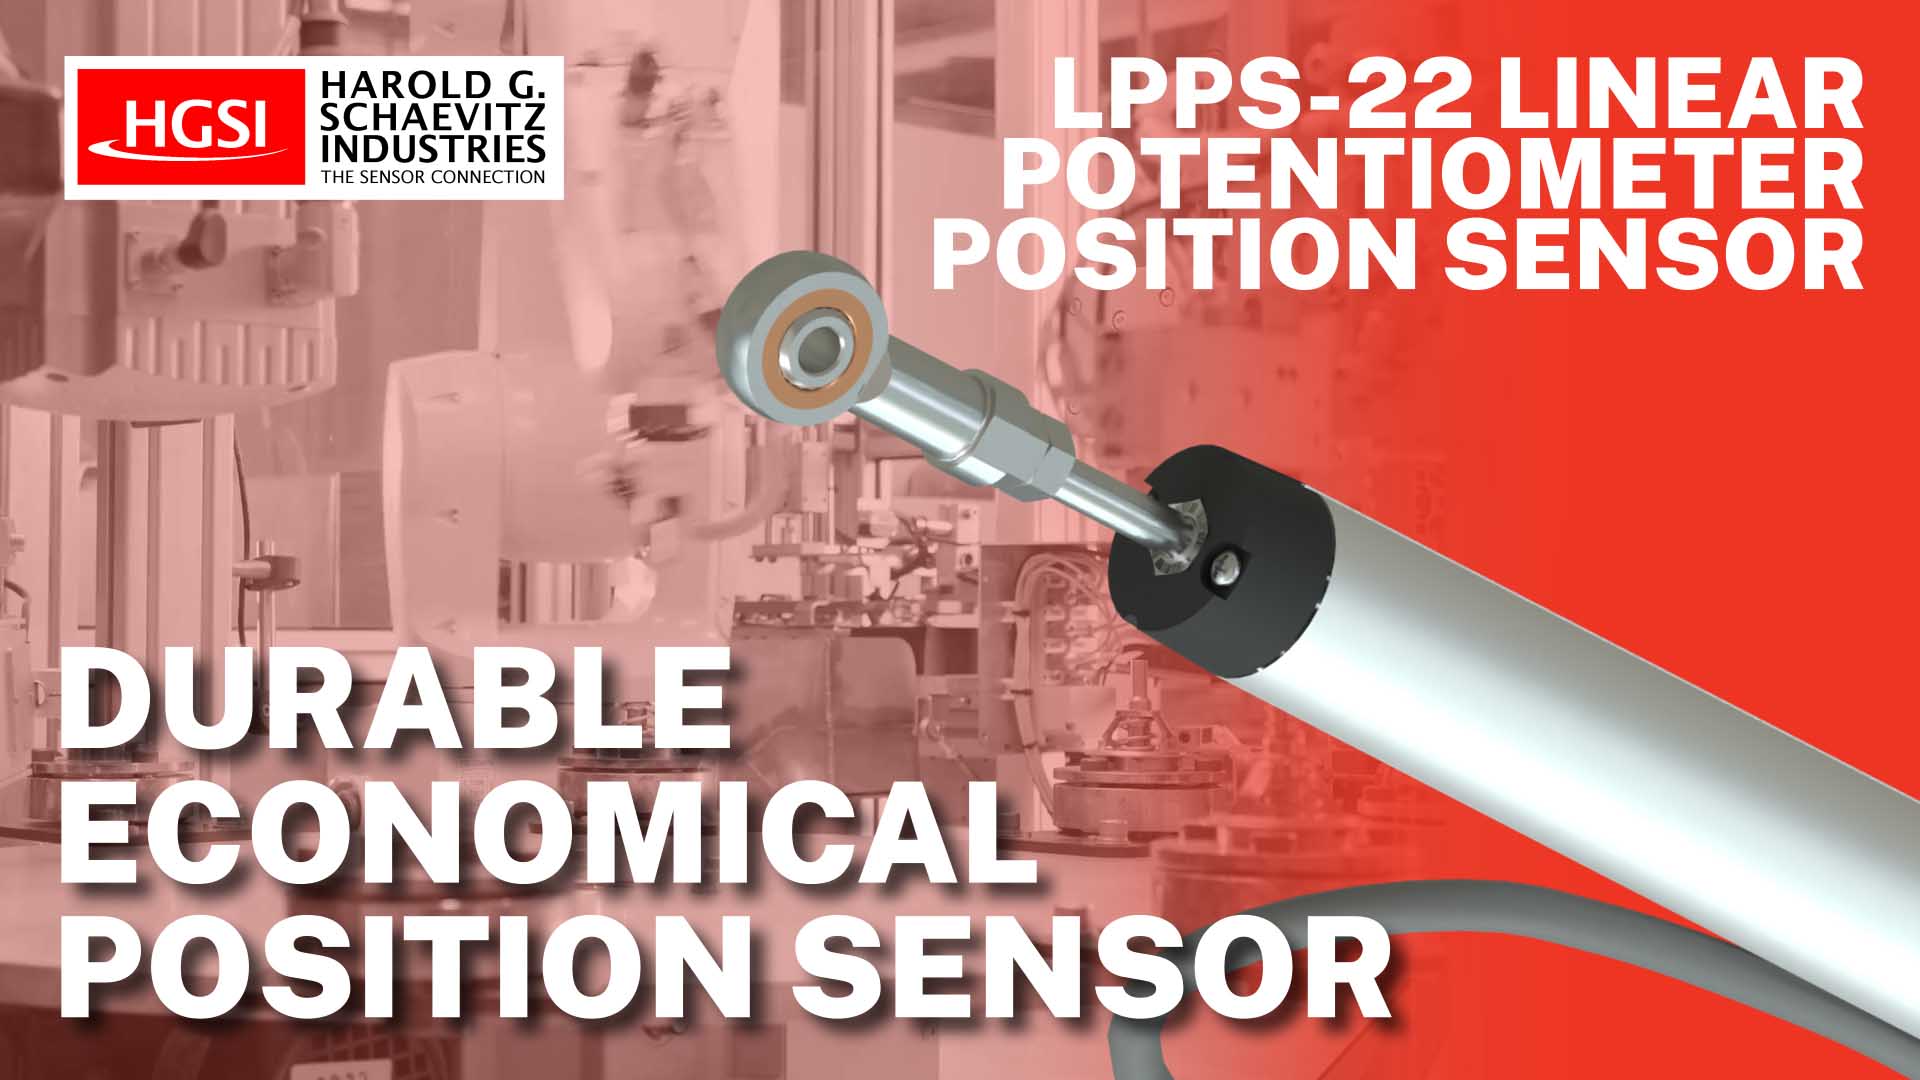 Overview of LPPS-22 Series Linear Potentiometer Position Sensor Thumbnail